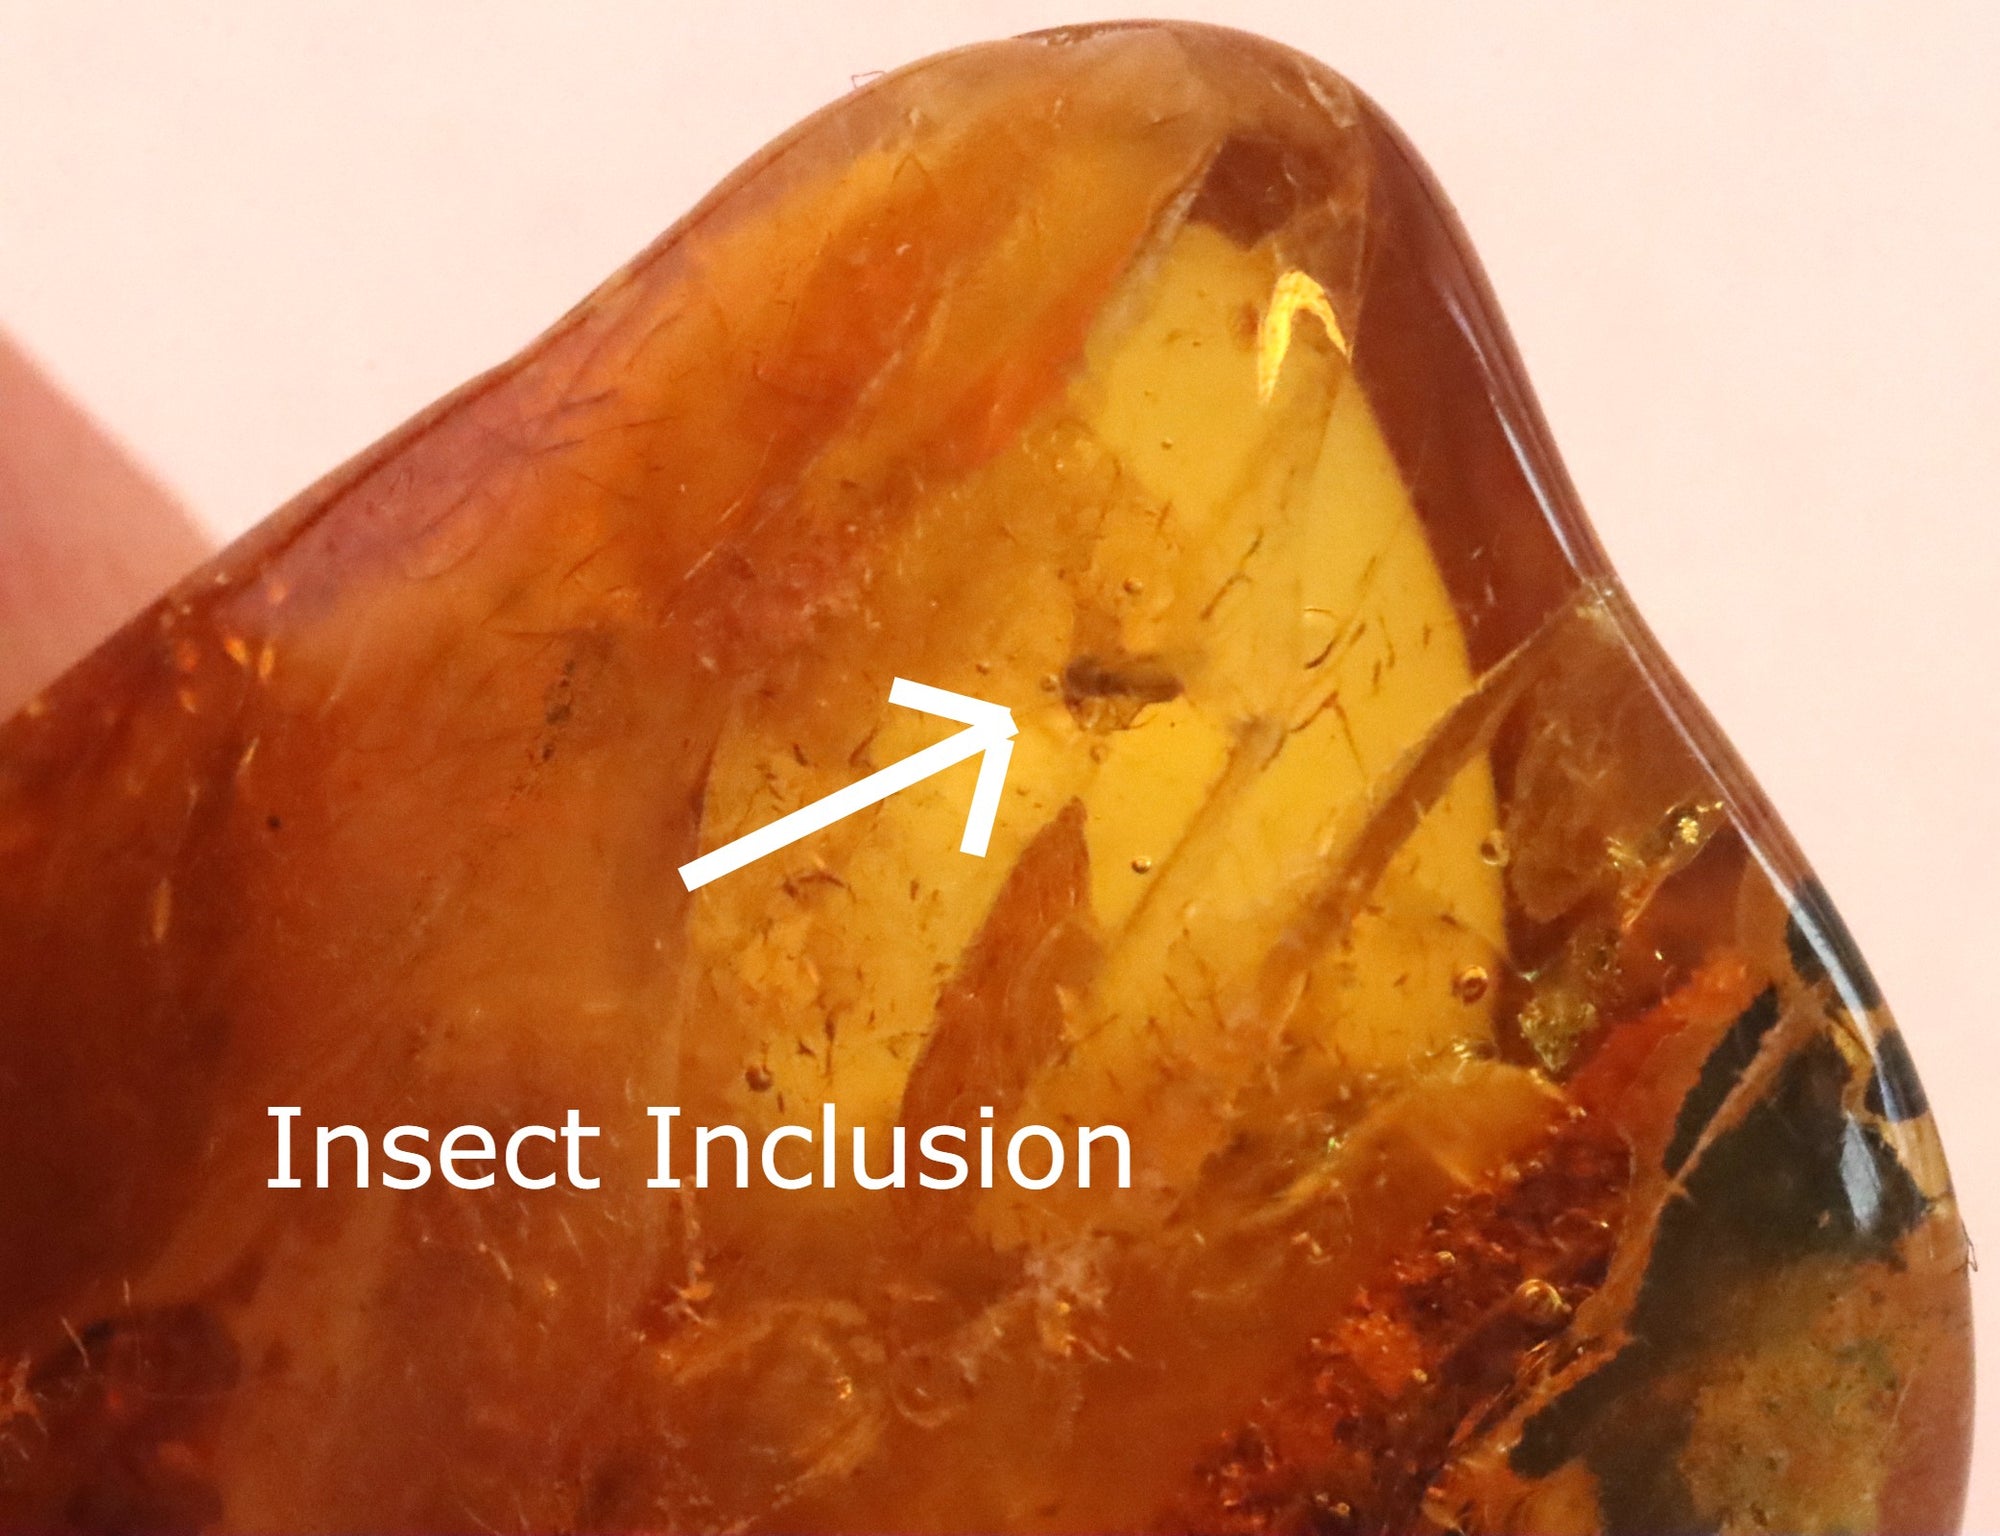 Insect in Baltic Amber